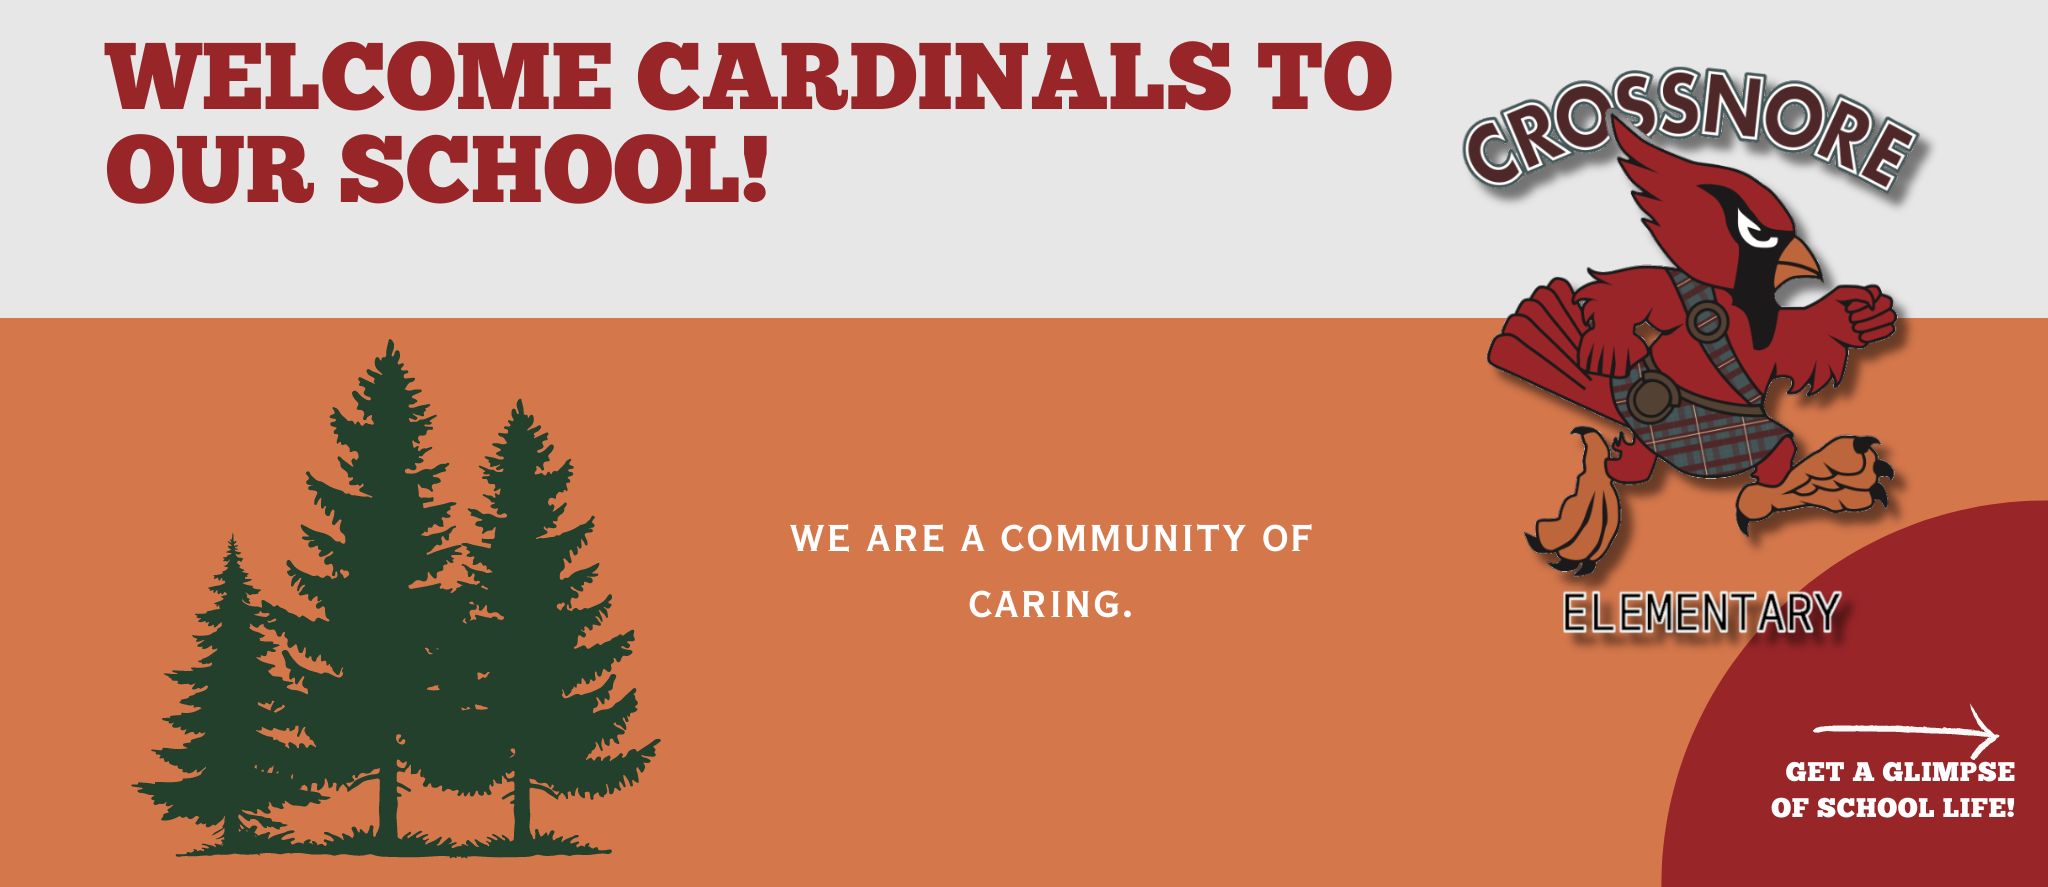 Welcome Cardinals to our school!